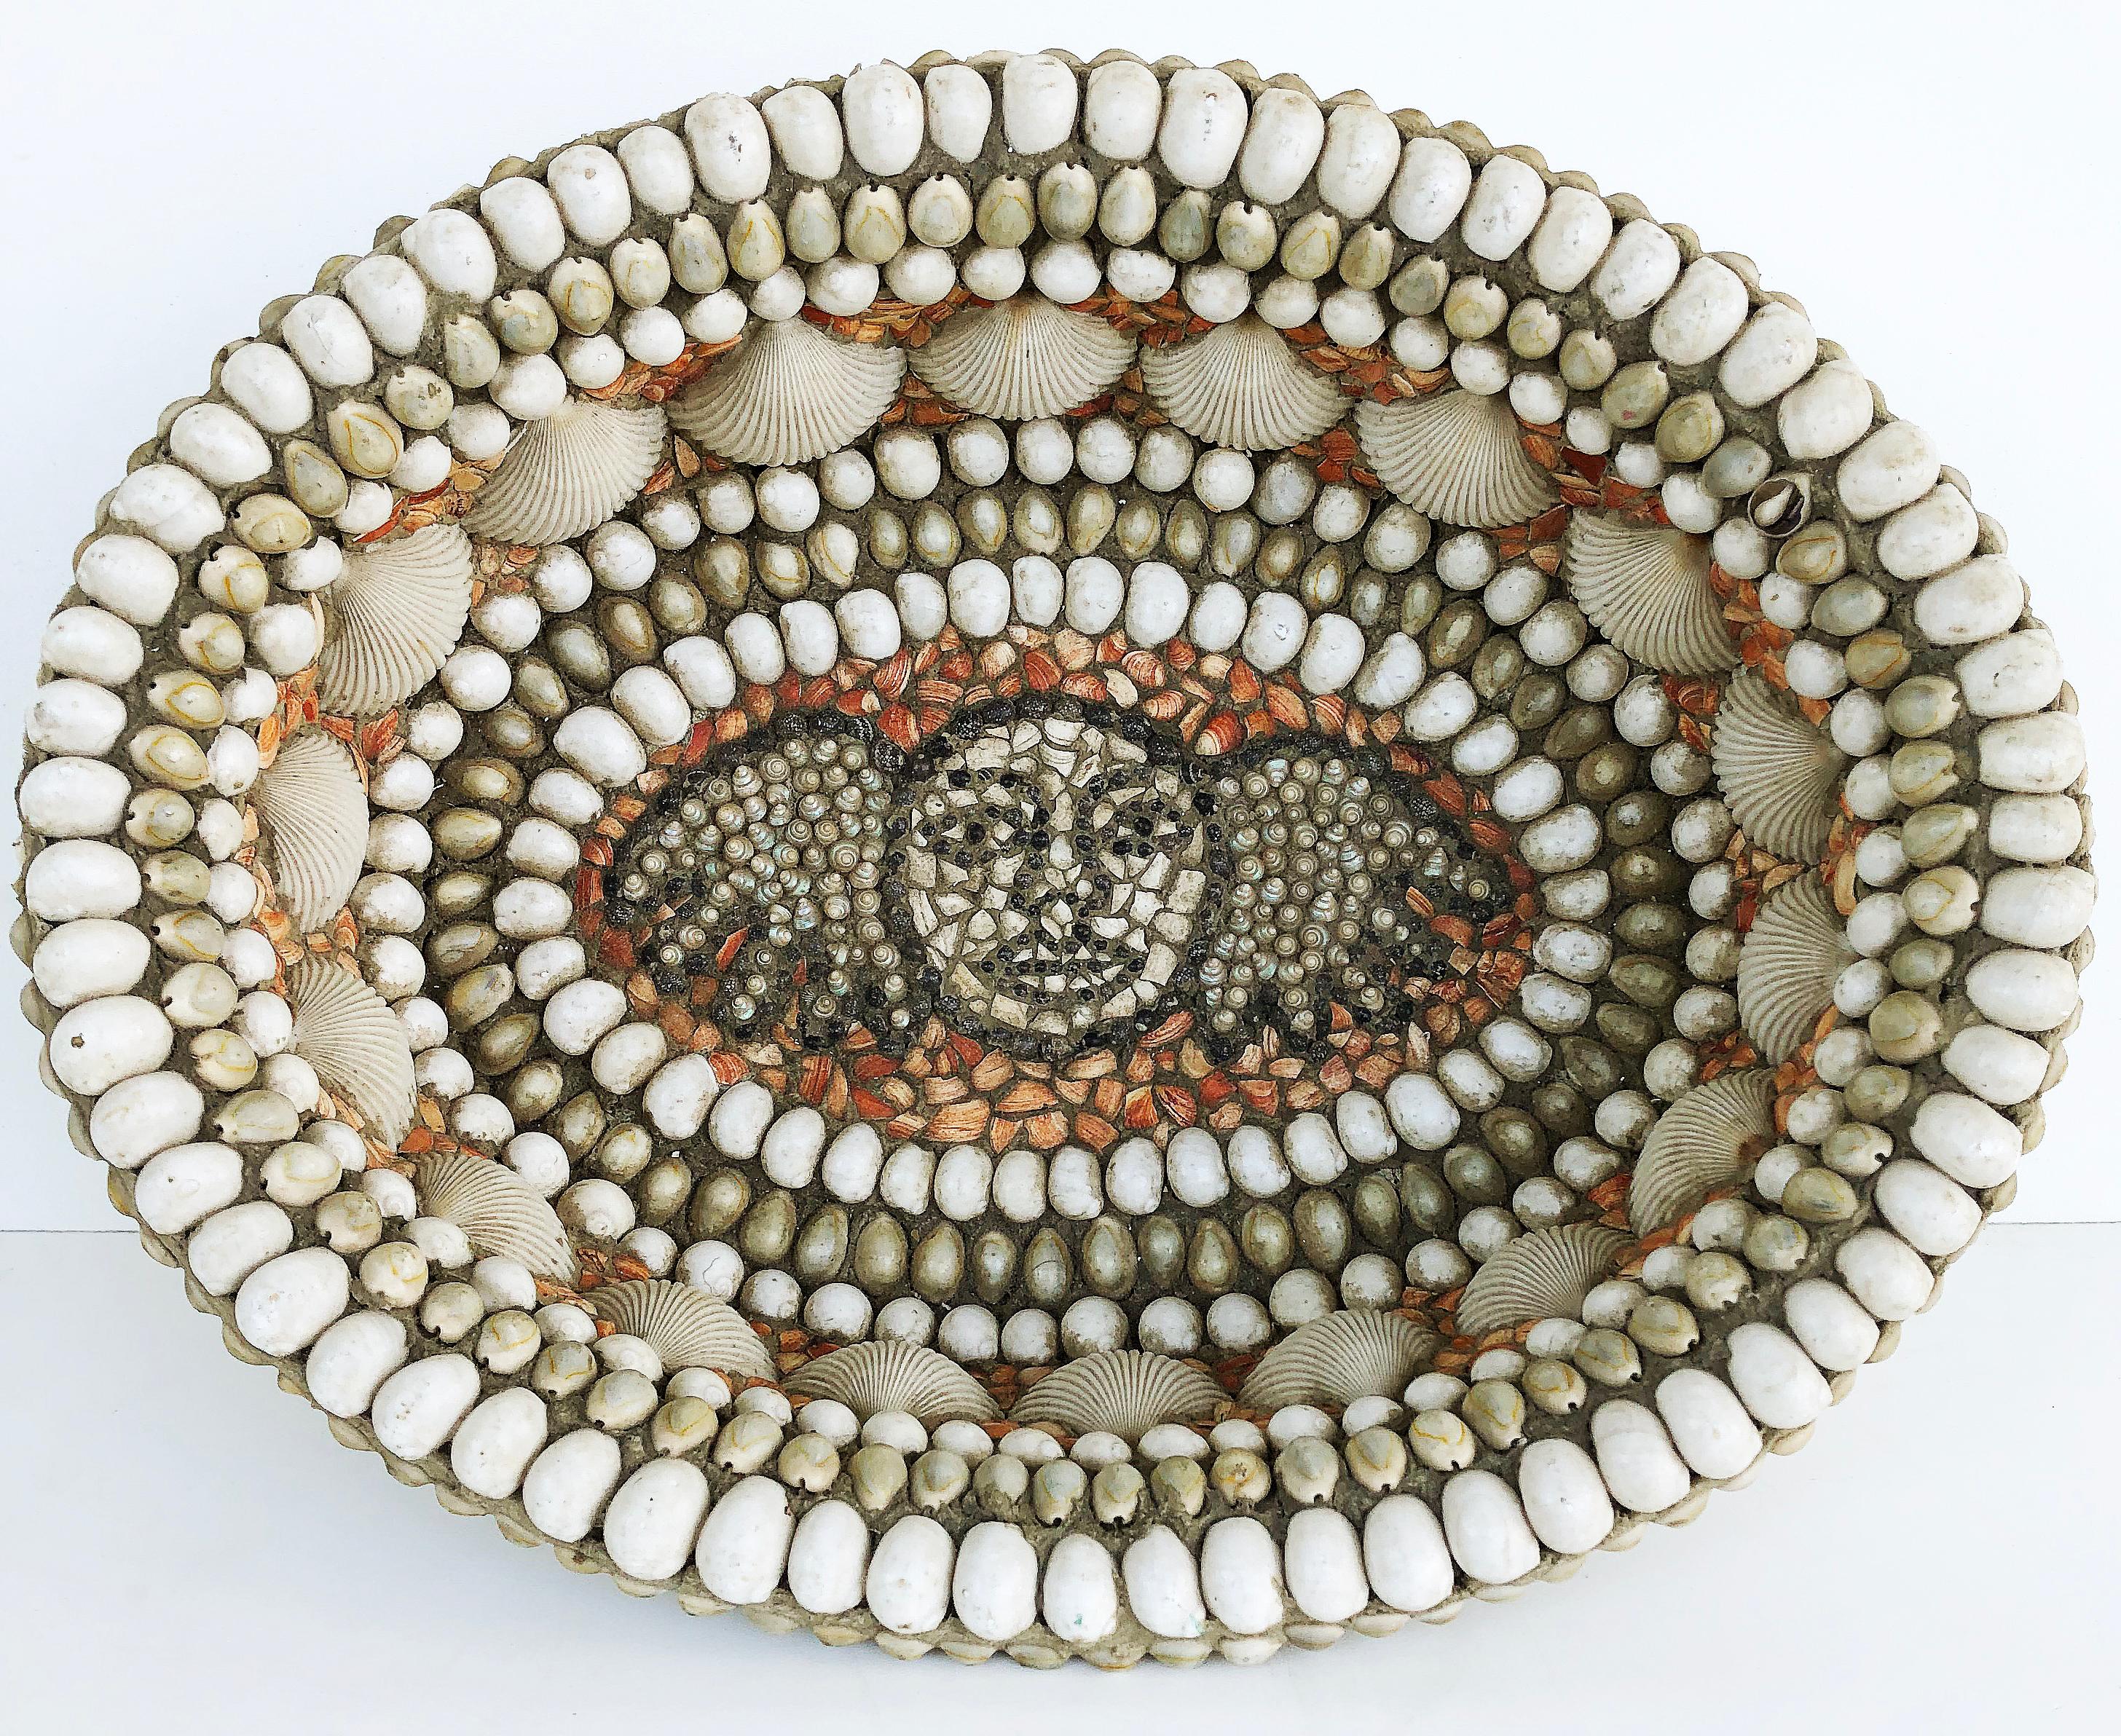 Vintage shell centerpiece bowl by Barton Lidicé Beneš (1942-2012)

Offered is an oval shell centerpiece created by New York artist Barton Lidicé Beneš (1942-2012). Barton Lidicé Beneš was born in Westwood, New Jersey on November 16, 1942. Beneš